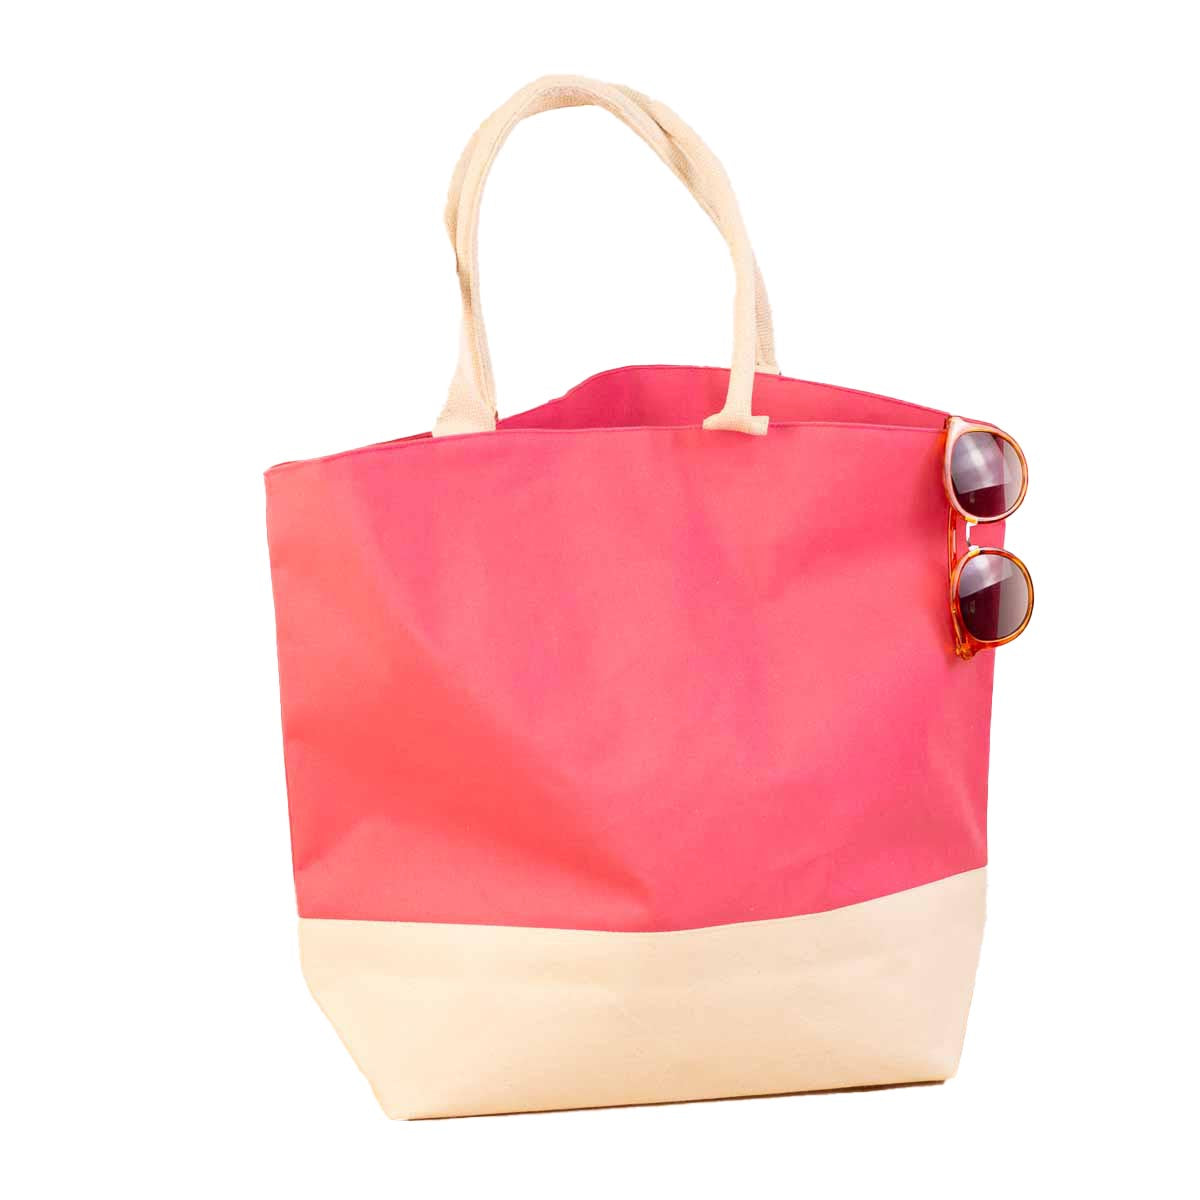 Tropical Tote in Pink/Natural